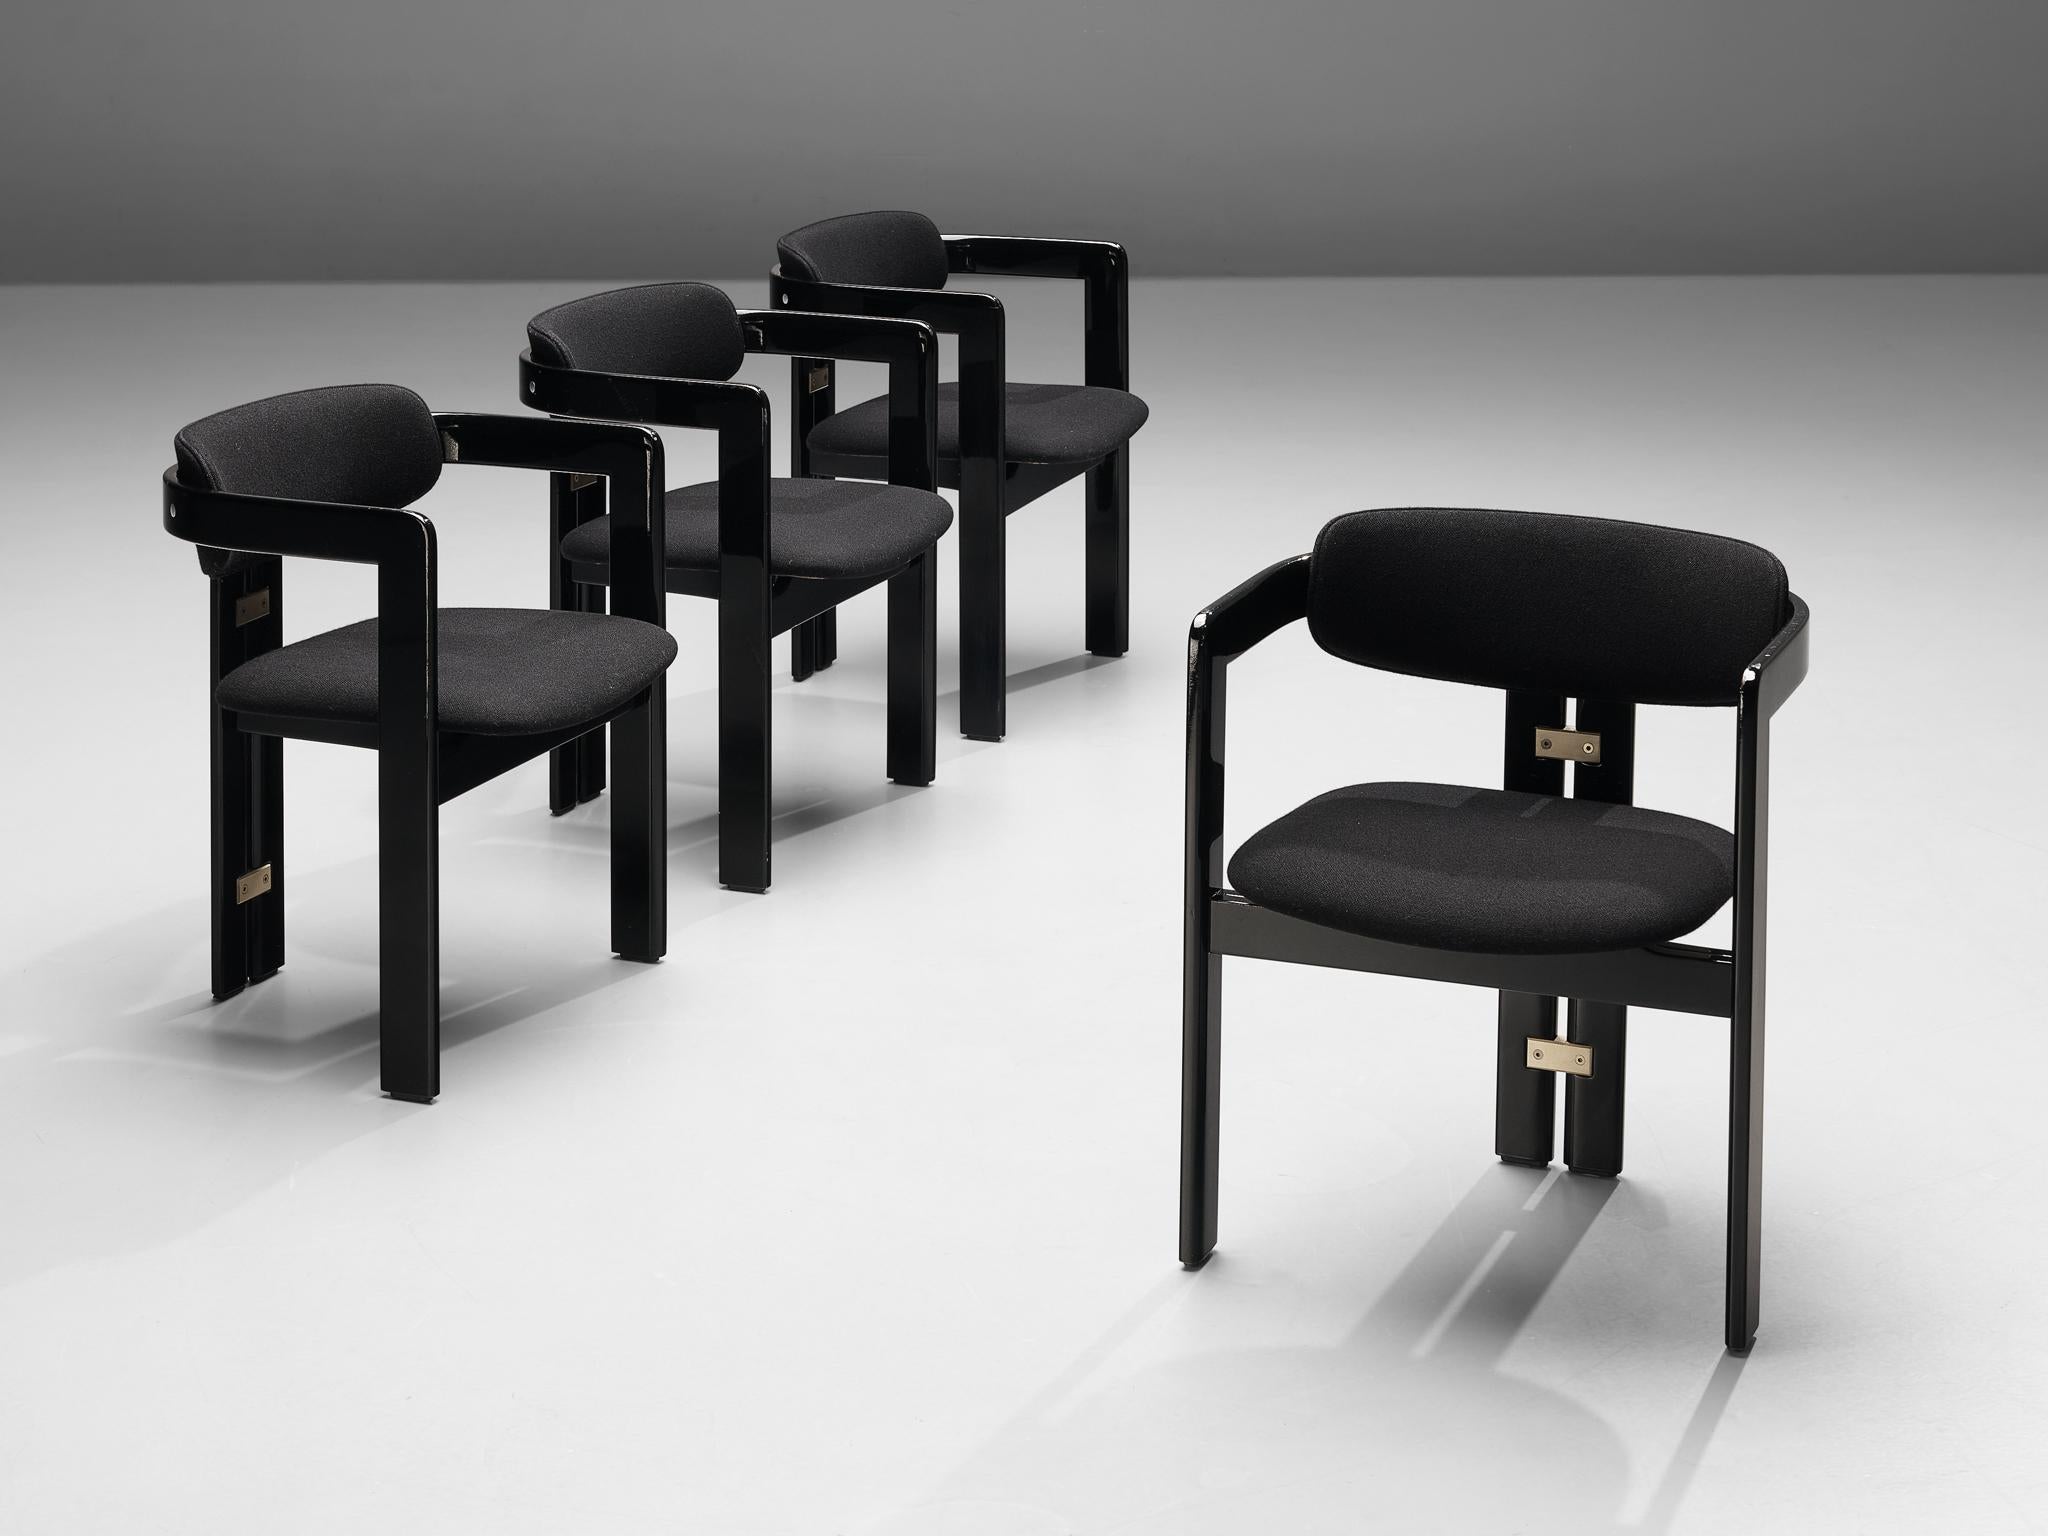 Augusto Savini for Pozzi, set of four 'Pamplona' dining chairs, black lacquered wood, black fabric upholstery, aluminium, Italy, 1965 

Set of four armchairs in black lacquered wood and black fabric upholstery. A characteristic design; simplistic